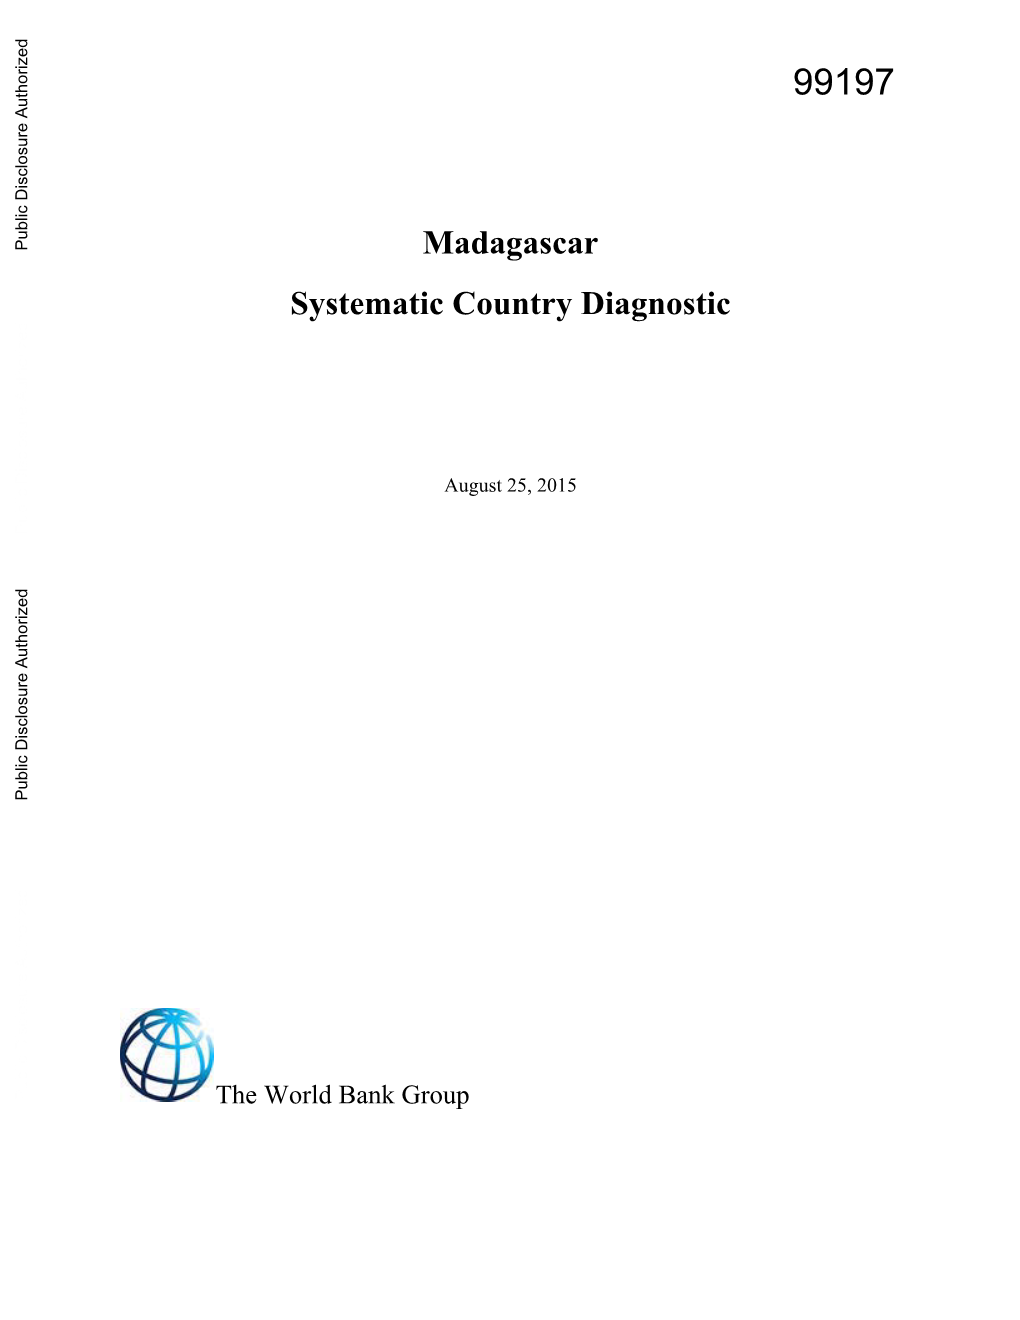 Madagascar Systematic Country Diagnostic